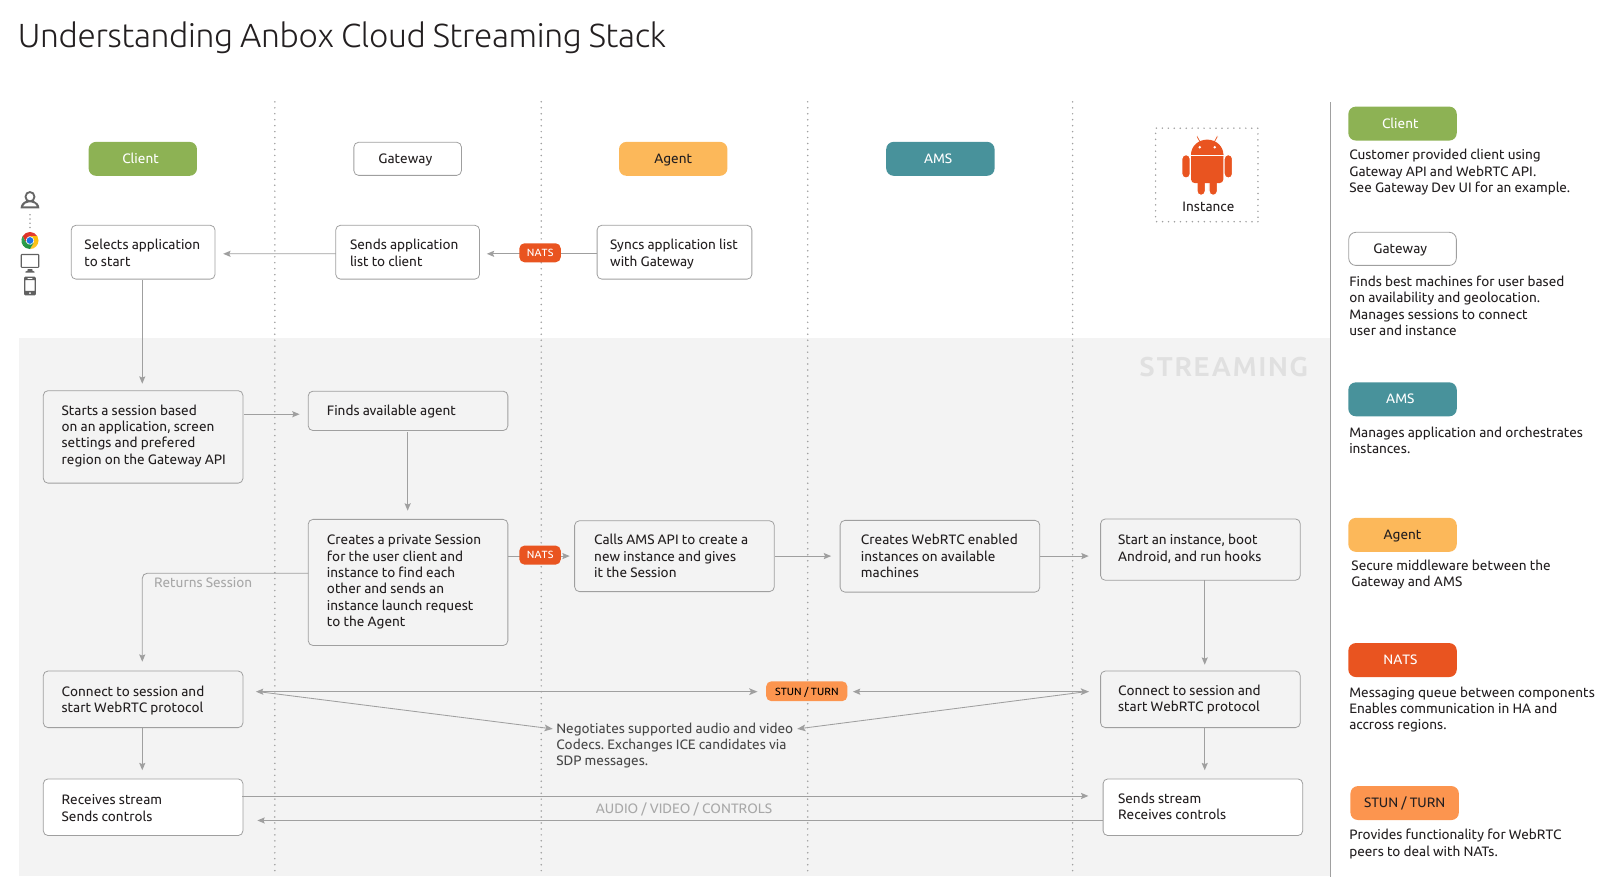 Streaming stack sequence